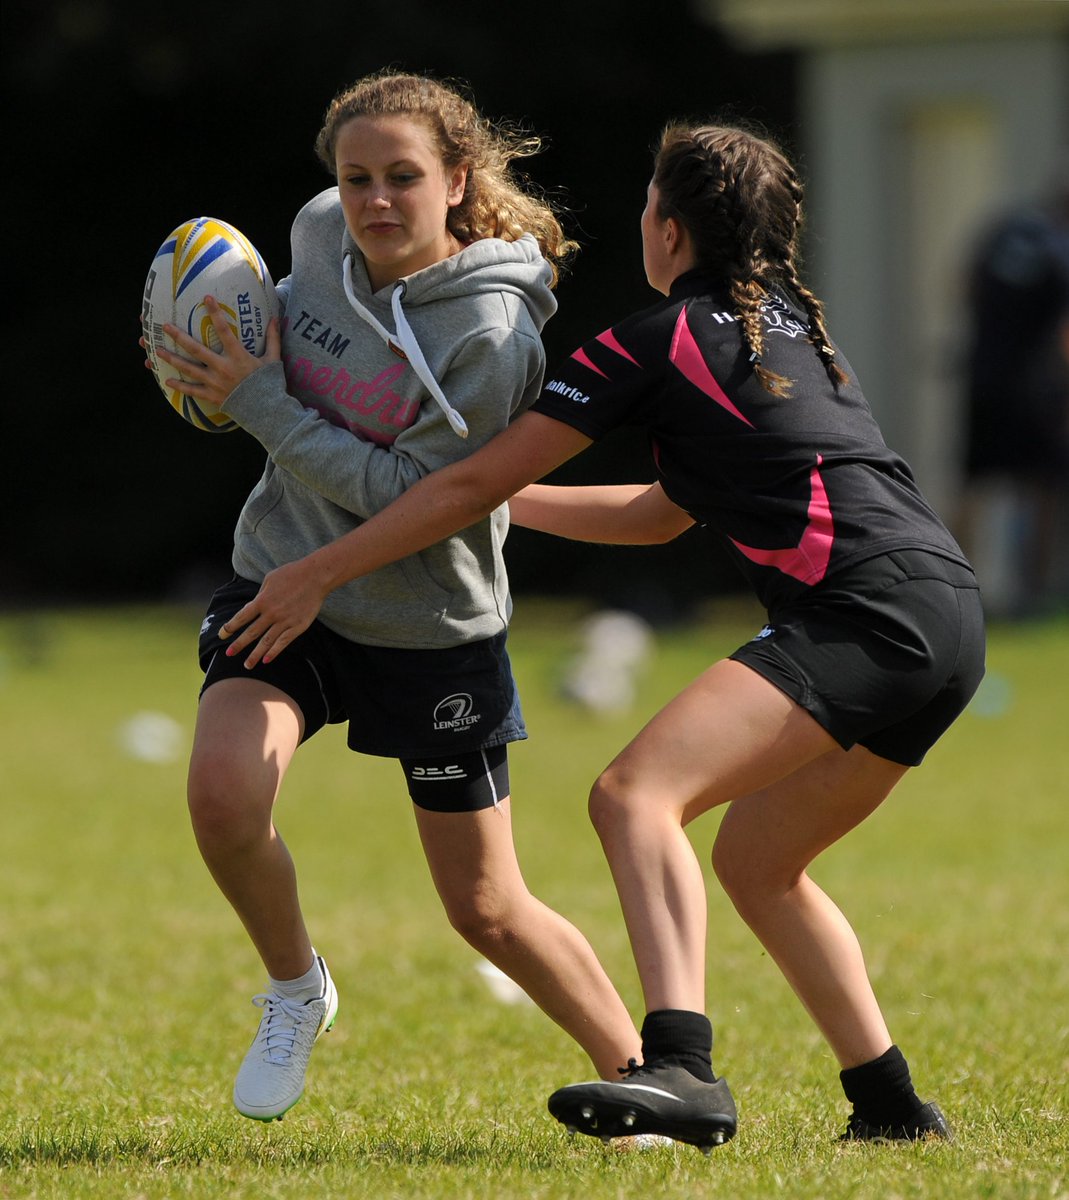 Leinster Rugby is running a Girls Easter Camp for the North East @AshbourneRFC on Mon 25th March. Open to girls age 12-15 & catering for all skill levels. For more info & to book you place, click on the link here - leinsterrugby.ie/2024/02/01/boo…